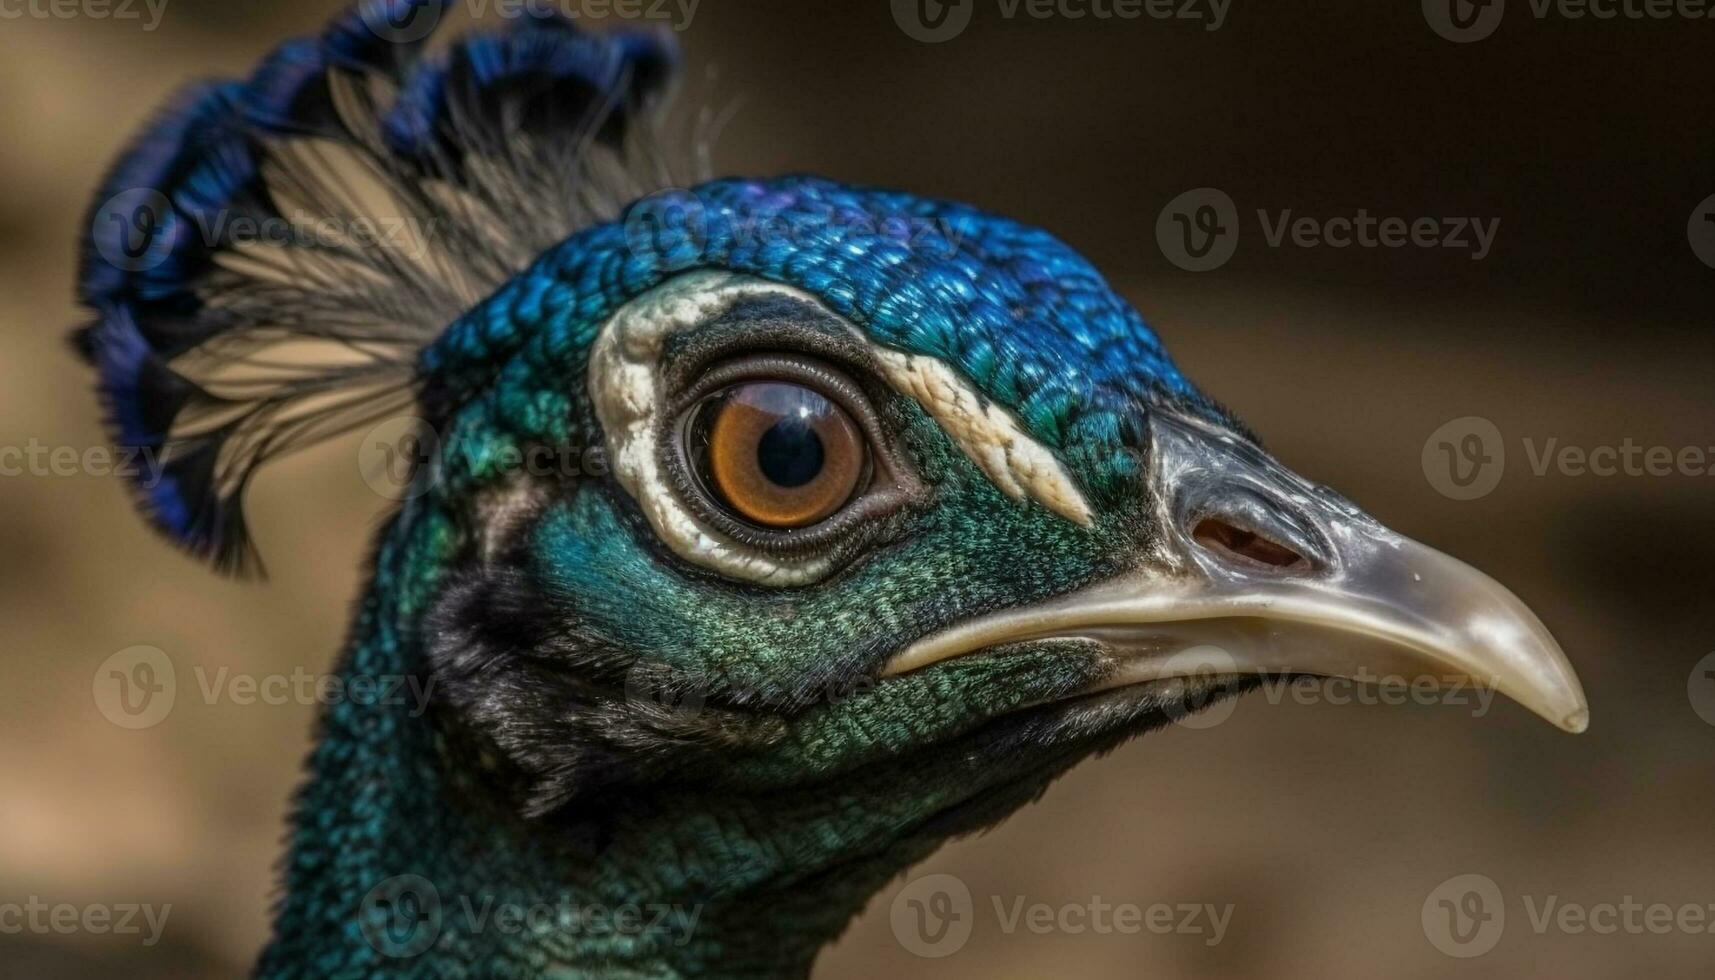 Majestic peacock displays vibrant colors in close up nature portrait generated by AI photo